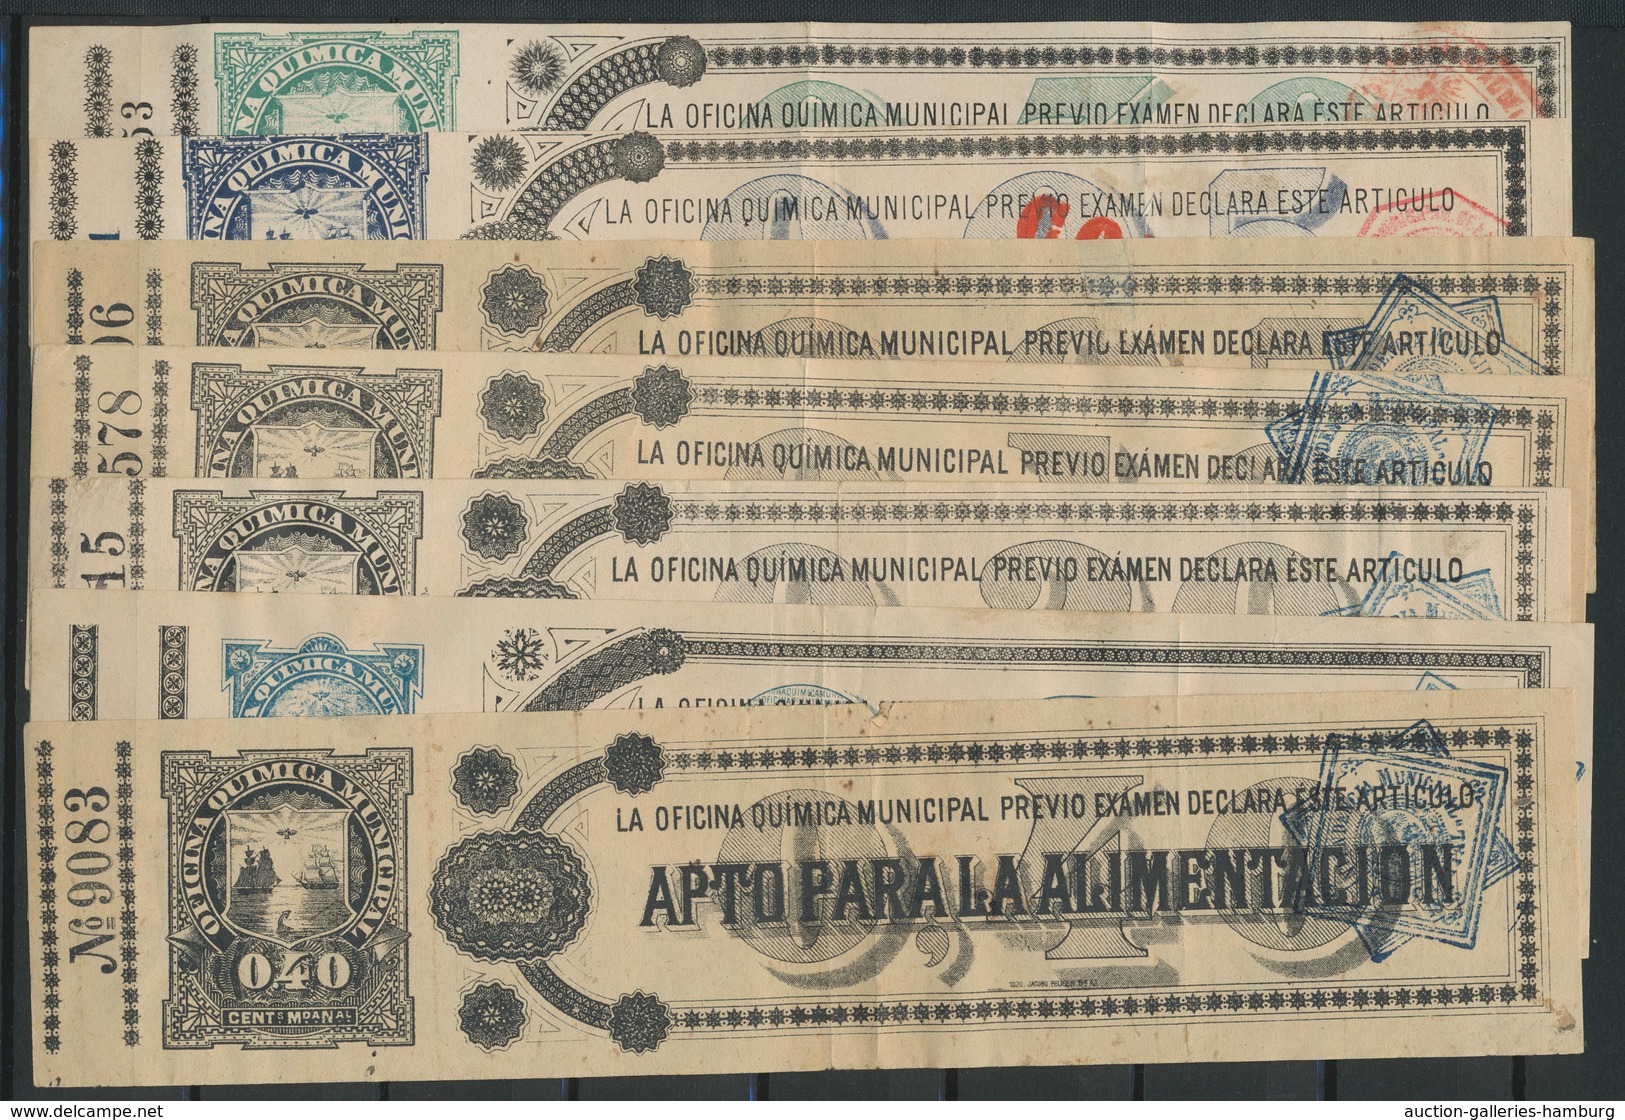 Kolumbien - Departamentos: Tolima: 1886, 5 And 10 Cents Coupon, Plus 1887-1893, Seven More Coupons I - Colombia